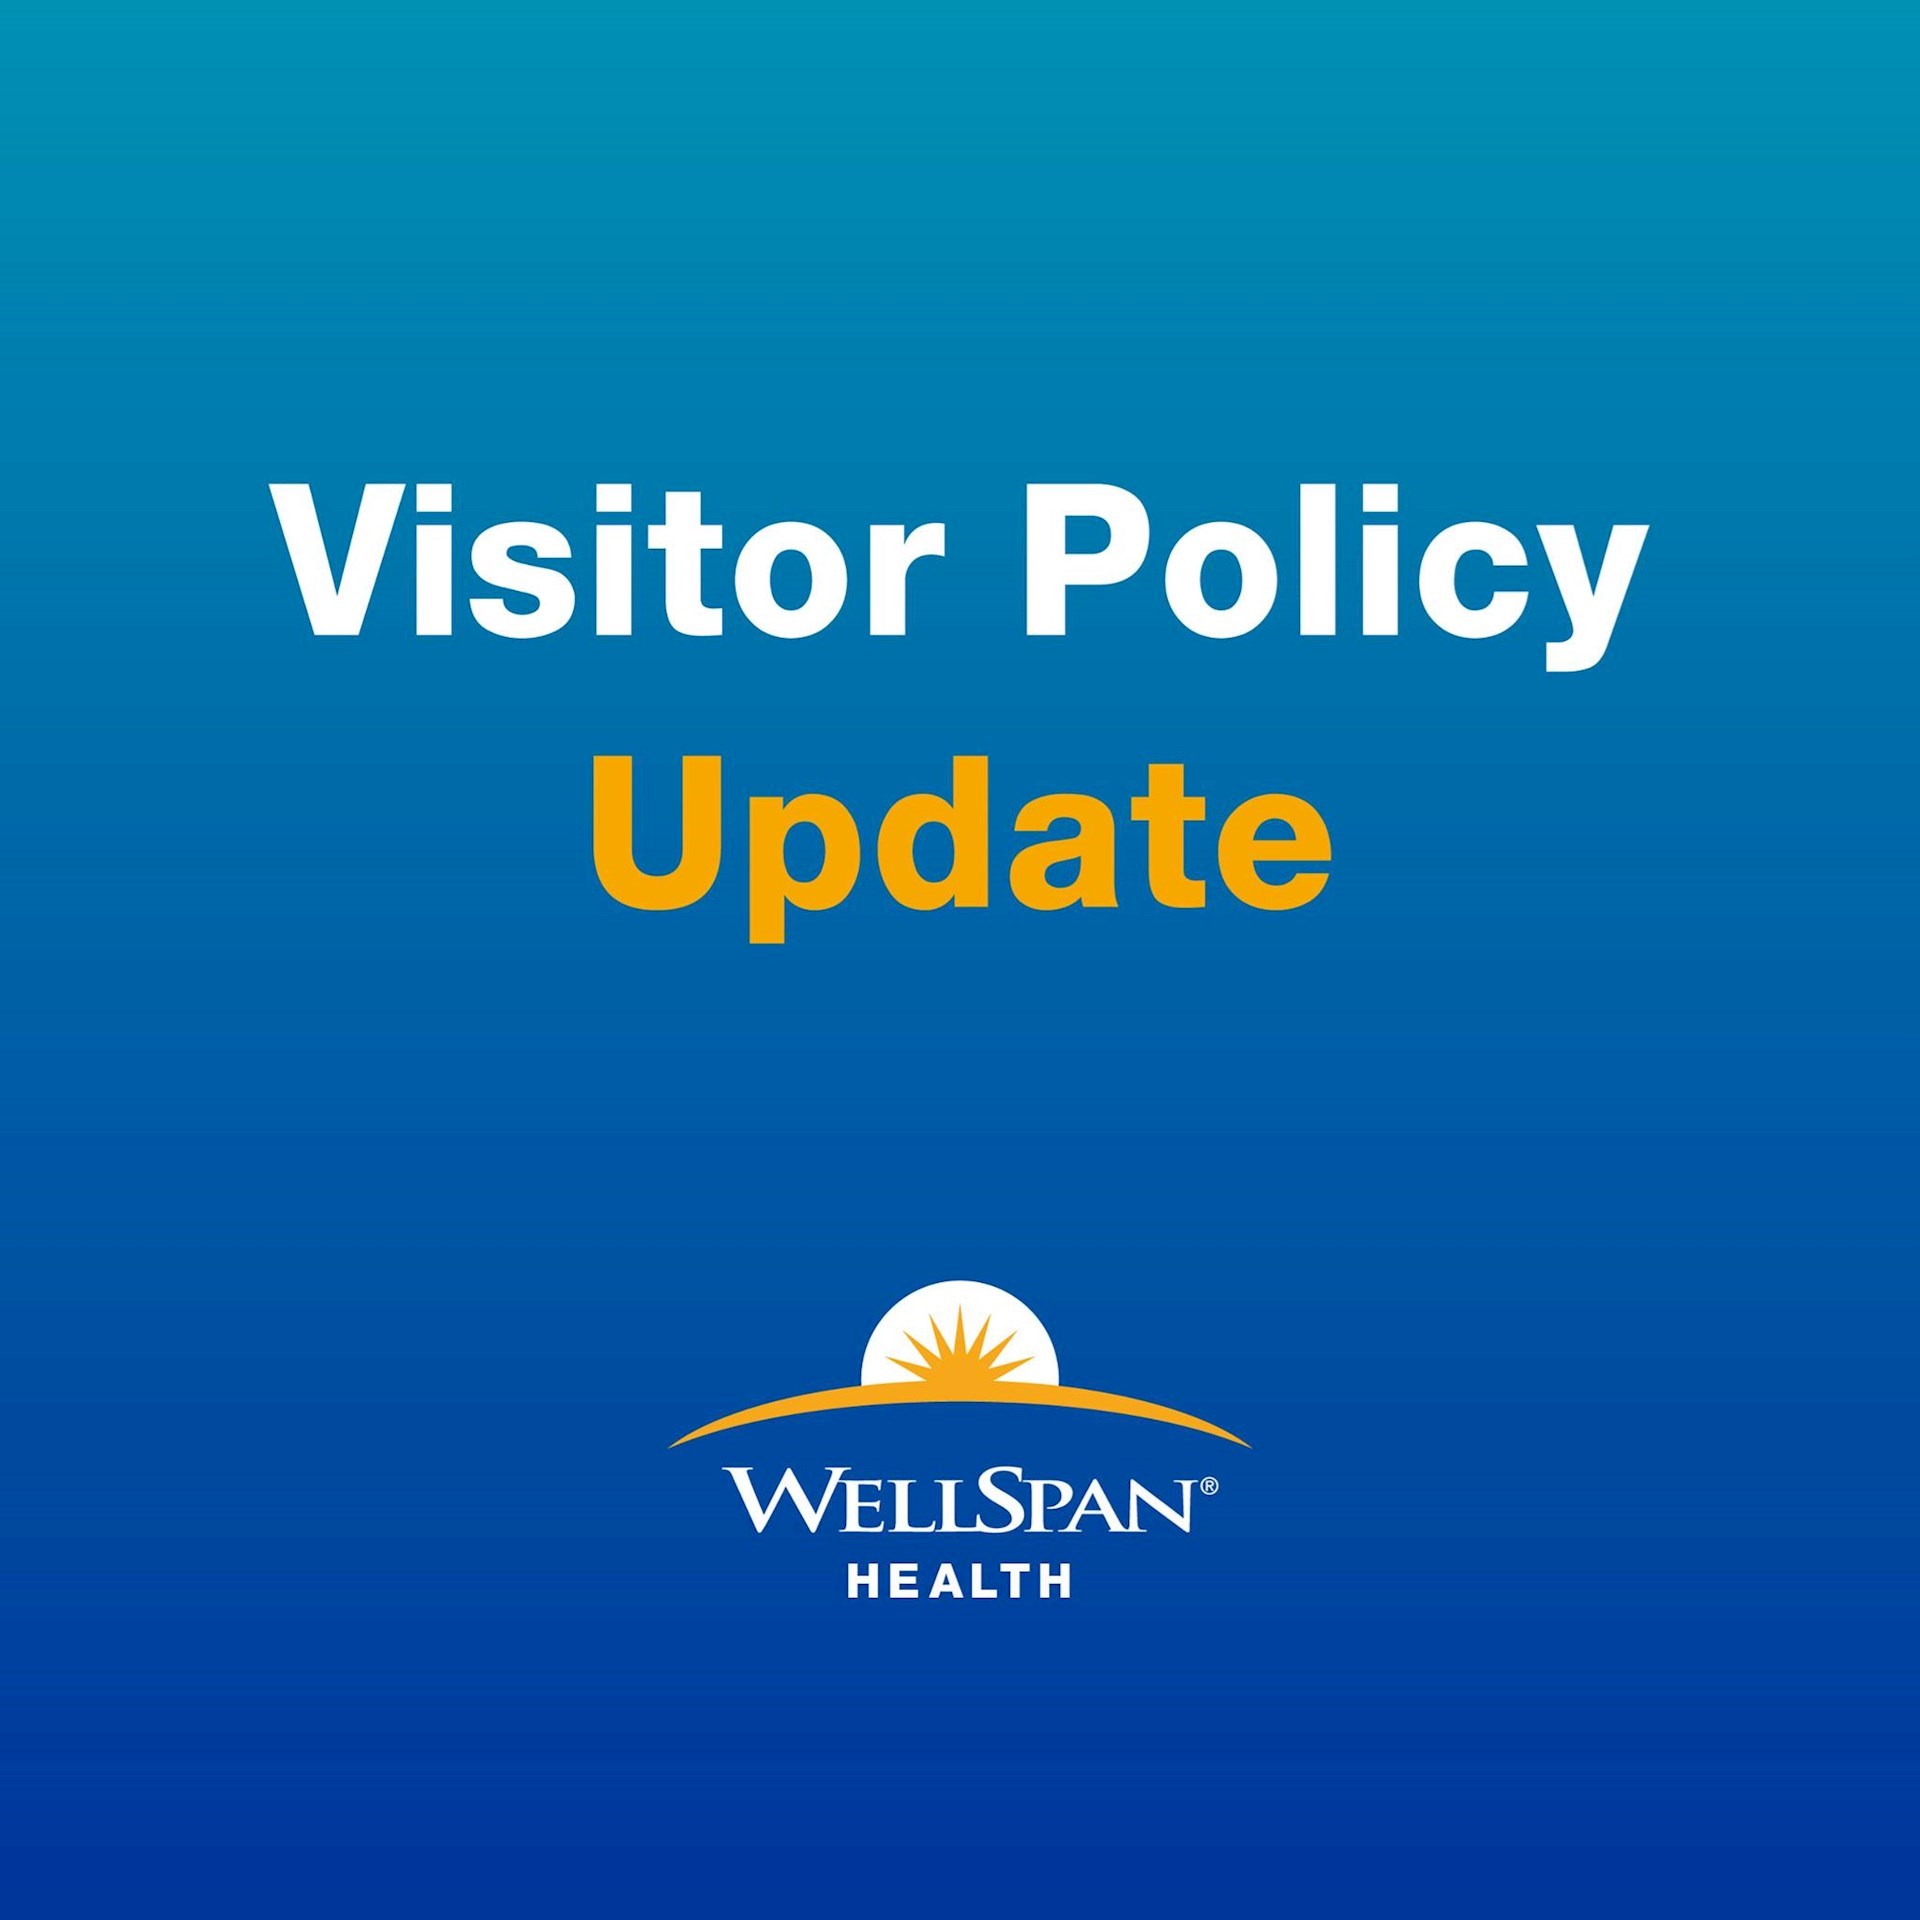 Effective Monday, February 7, 2022, due to decreasing hospitalizations of COVID-19 across central Pennsylvania, patients at WellSpan hospitals, including COVID-19 positive patients, are allowed one visitor or support person at a time. Up to two designated visitors are permitted per the patient’s length of stay.